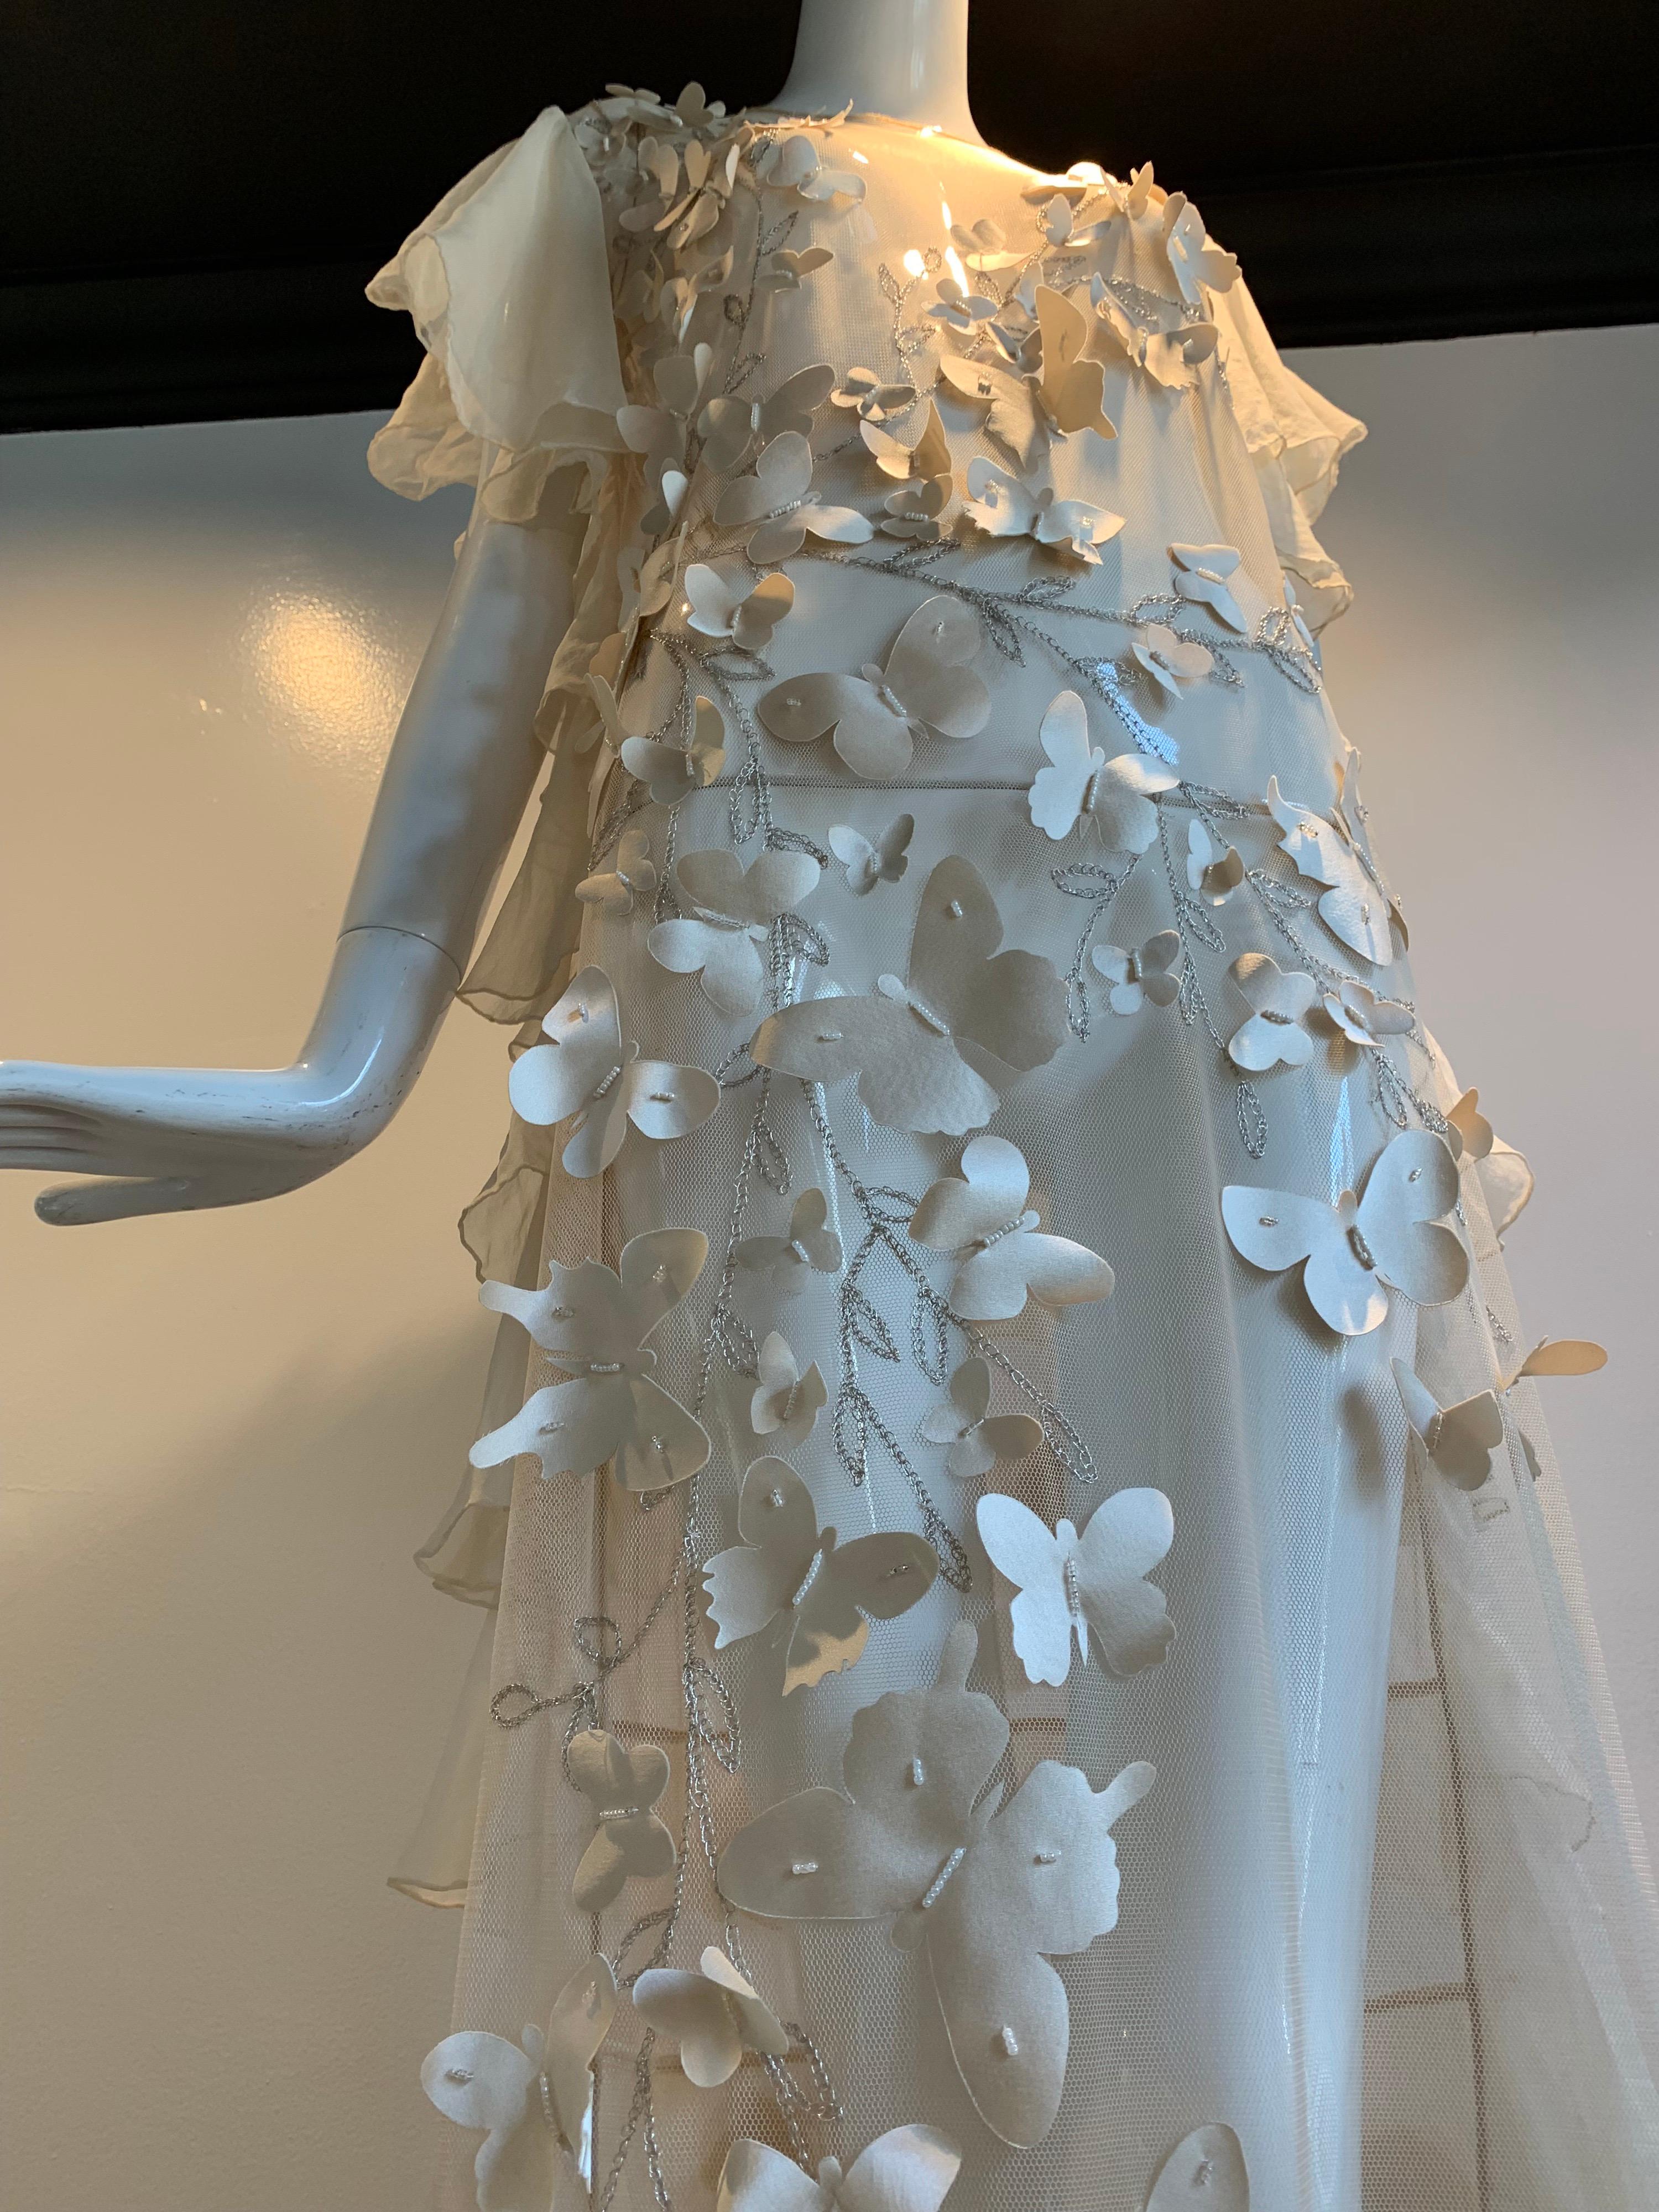 Torso Creations Eggshell Silk Chiffon Ruffled Wedding Gown W/ Silk Butterflies In Excellent Condition For Sale In Gresham, OR